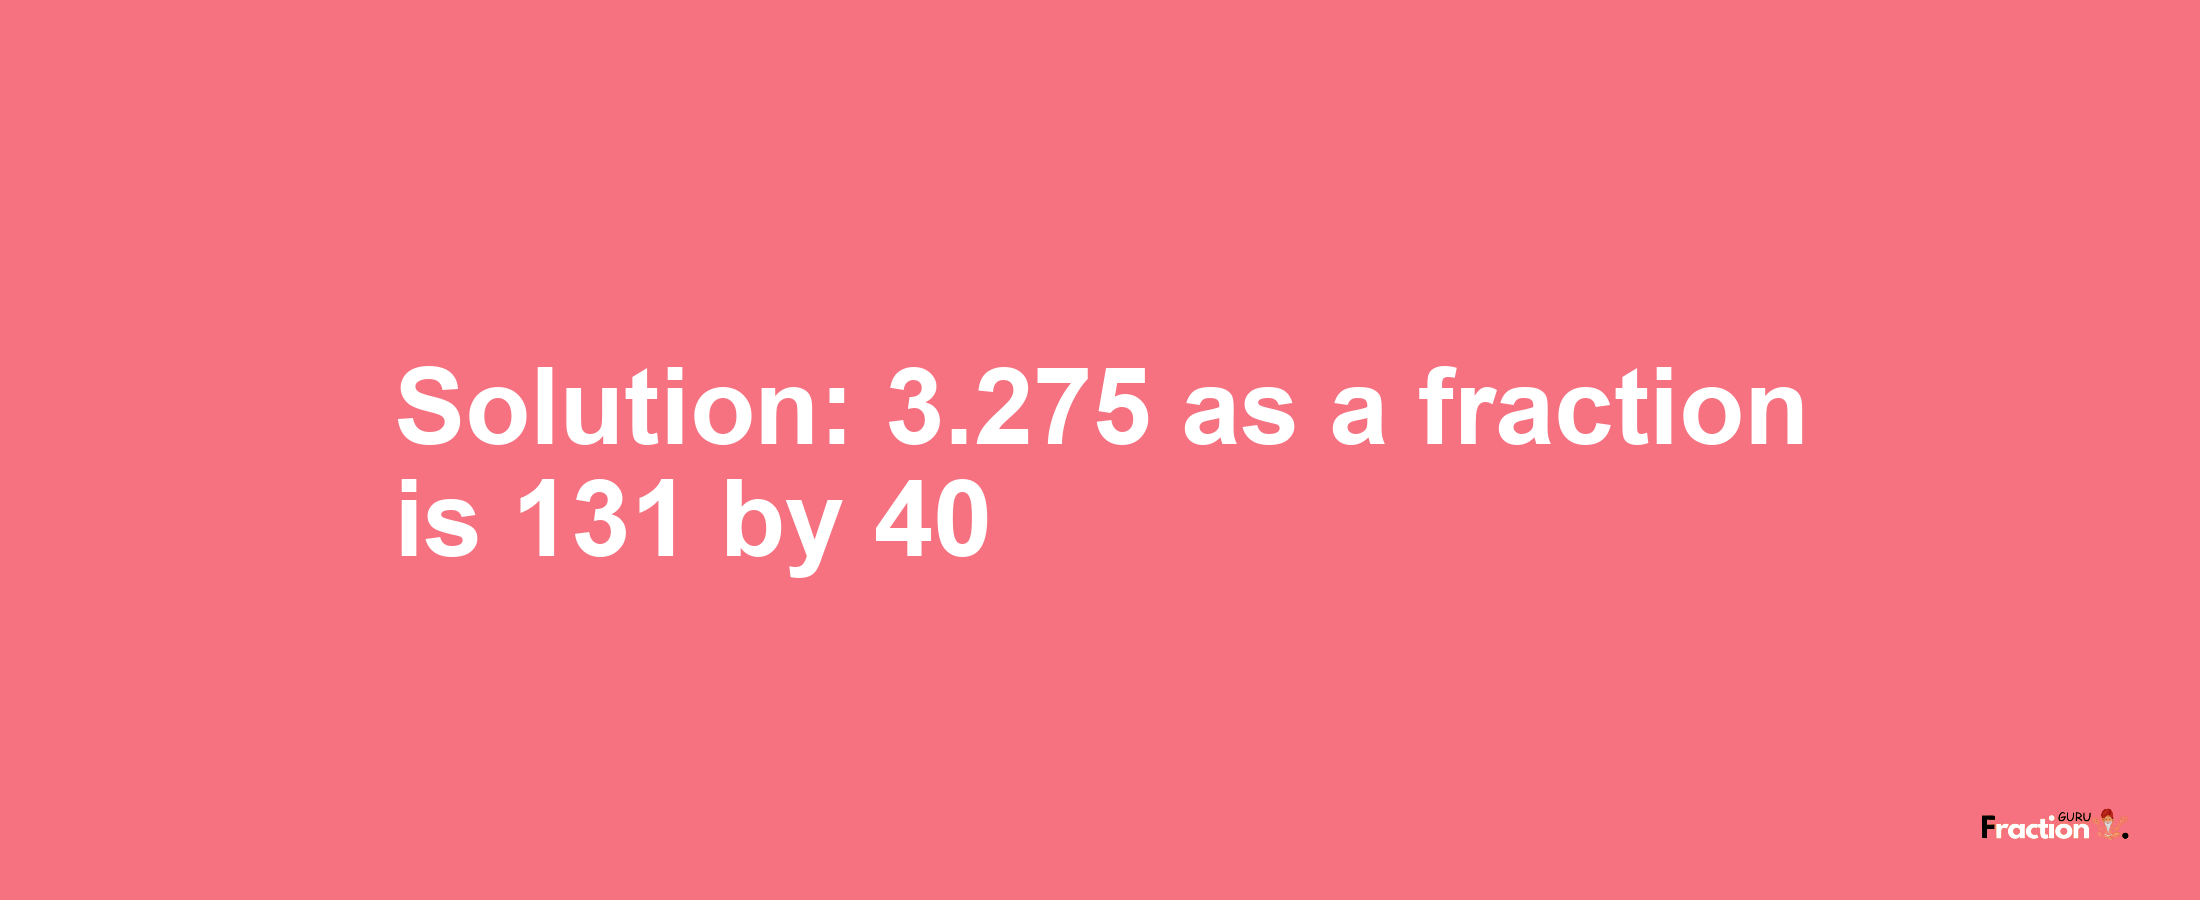 Solution:3.275 as a fraction is 131/40